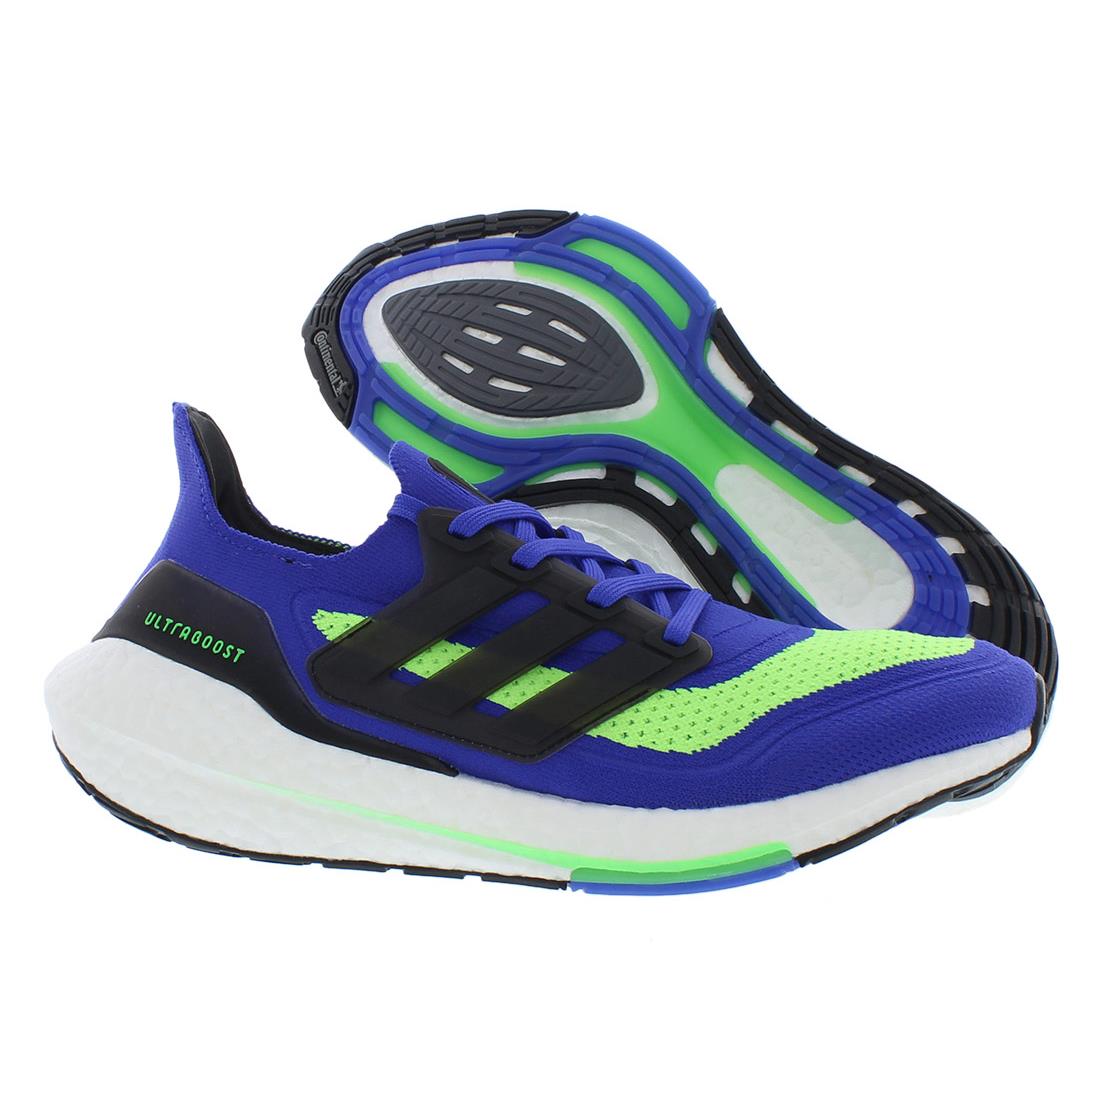 Adidas Ultraboost 21 Mens Shoes Sonic Ink/Black/Screaming Green